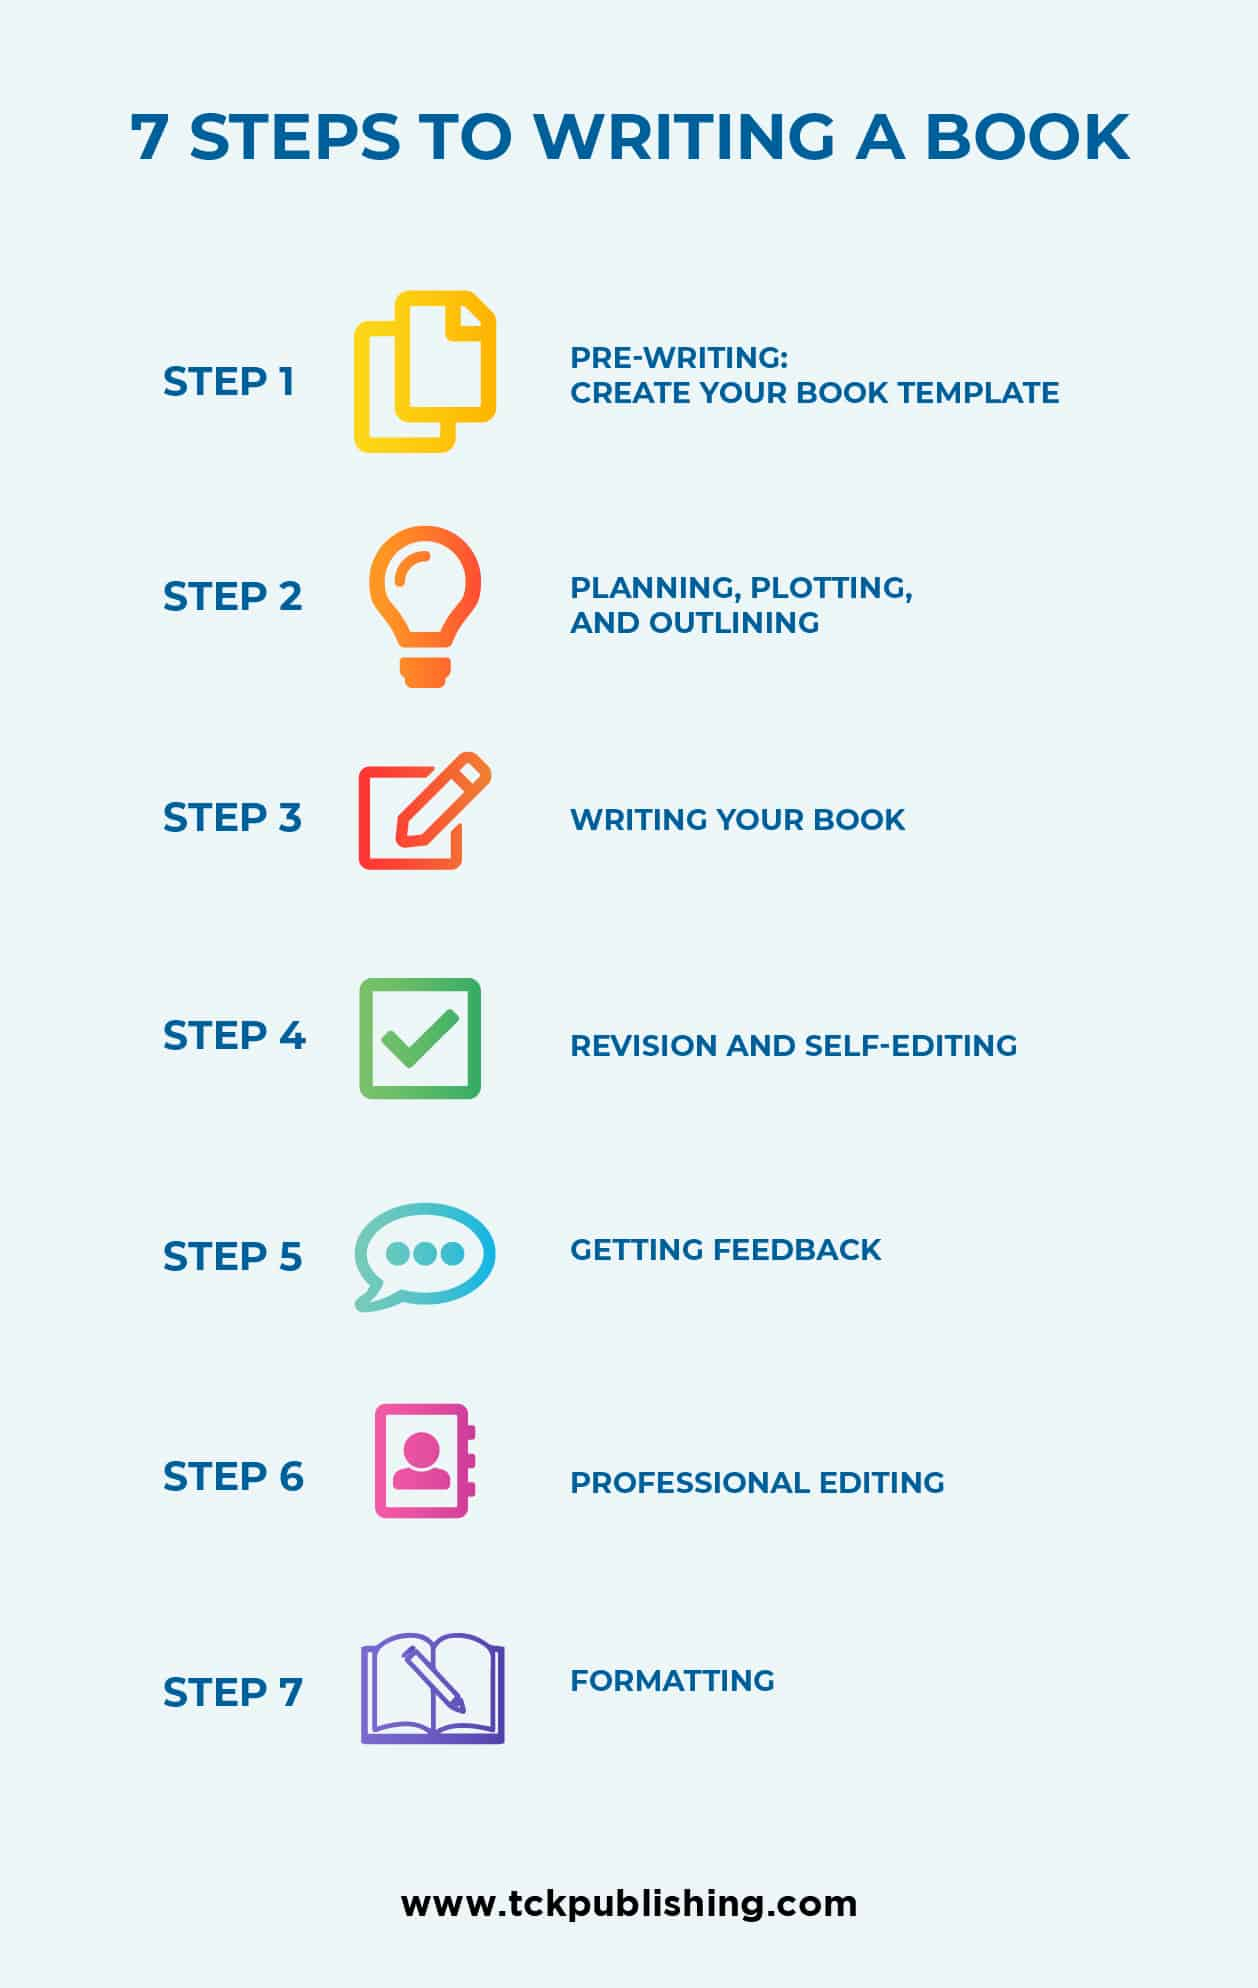 How To Write A Book: 7 Simple Steps To Writing A Book That's With How To Create A Book Template In Word